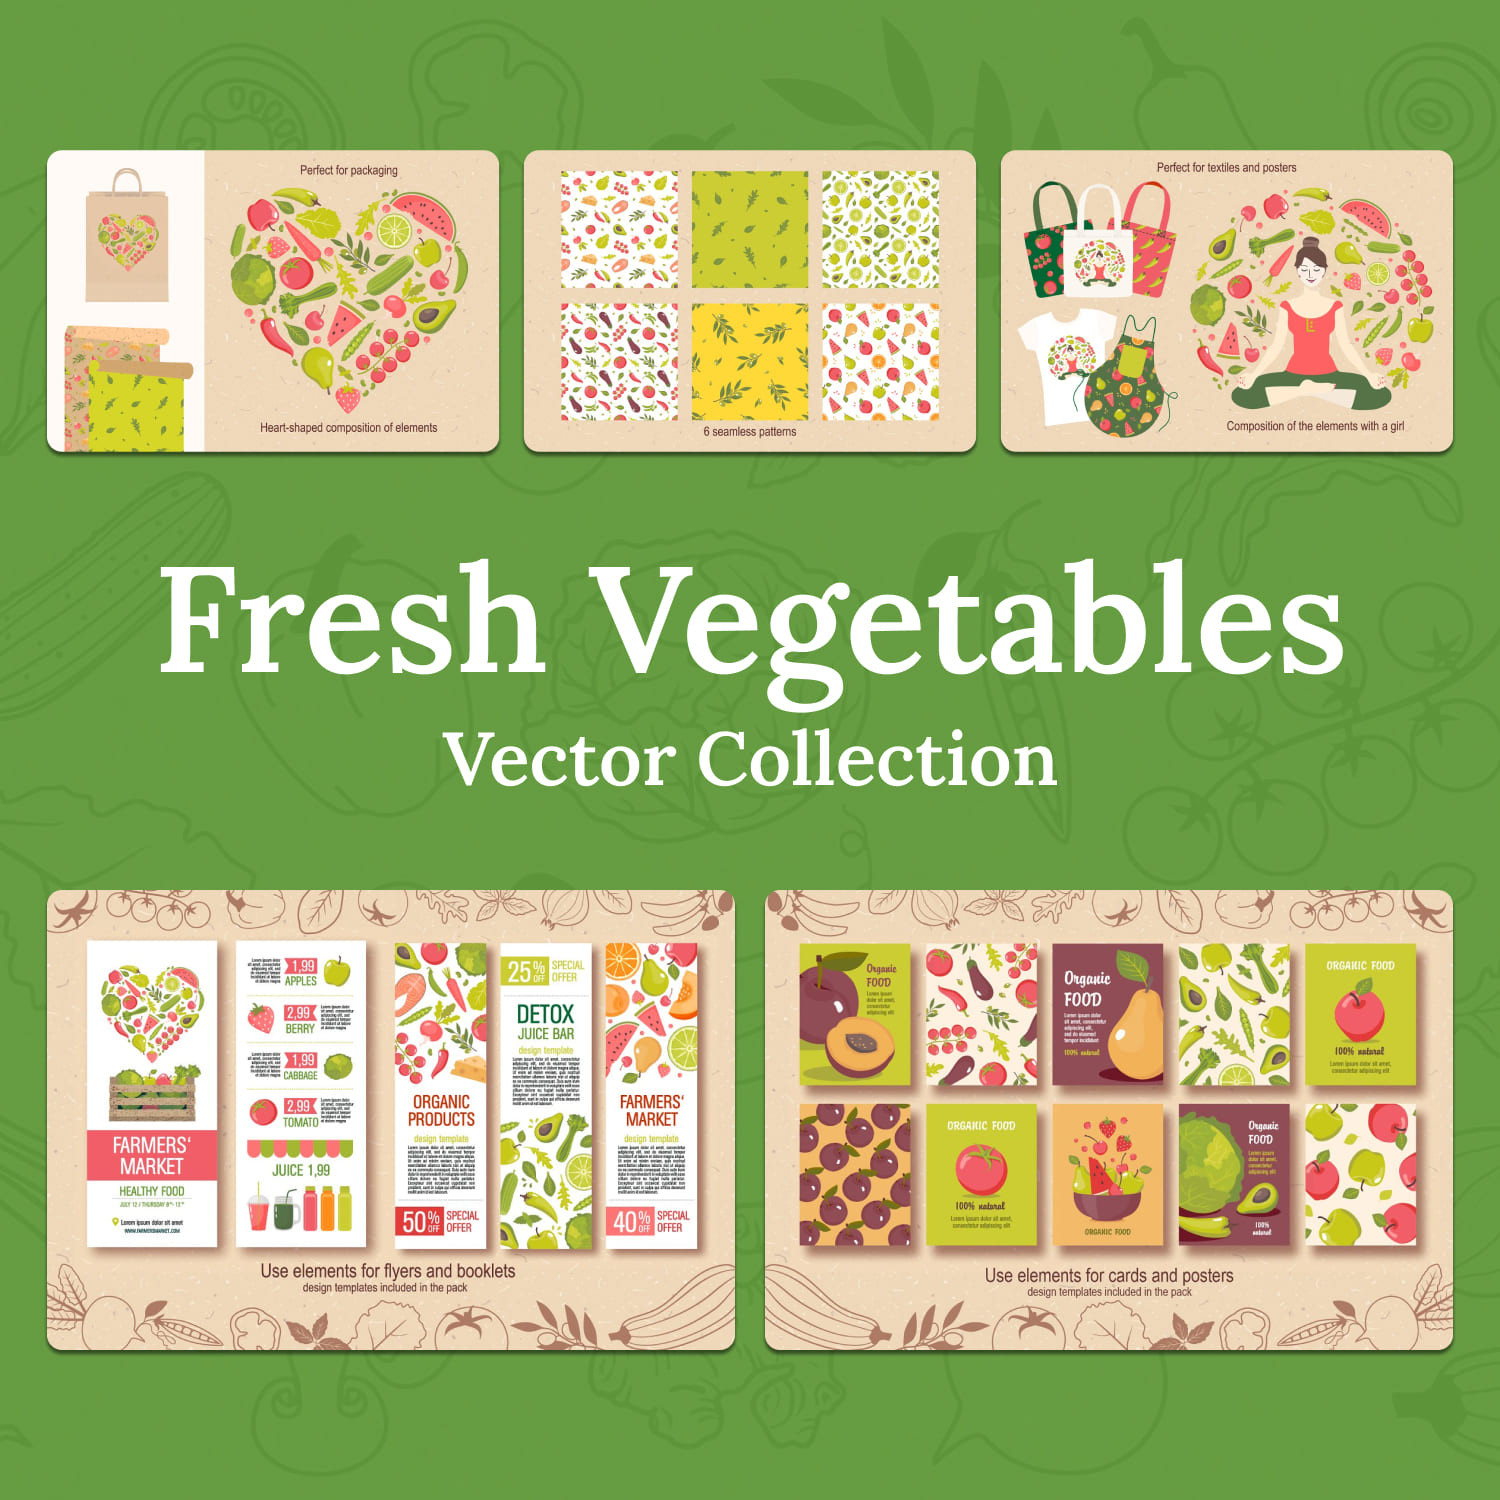 Fresh vegetables vector collection - main image preview.